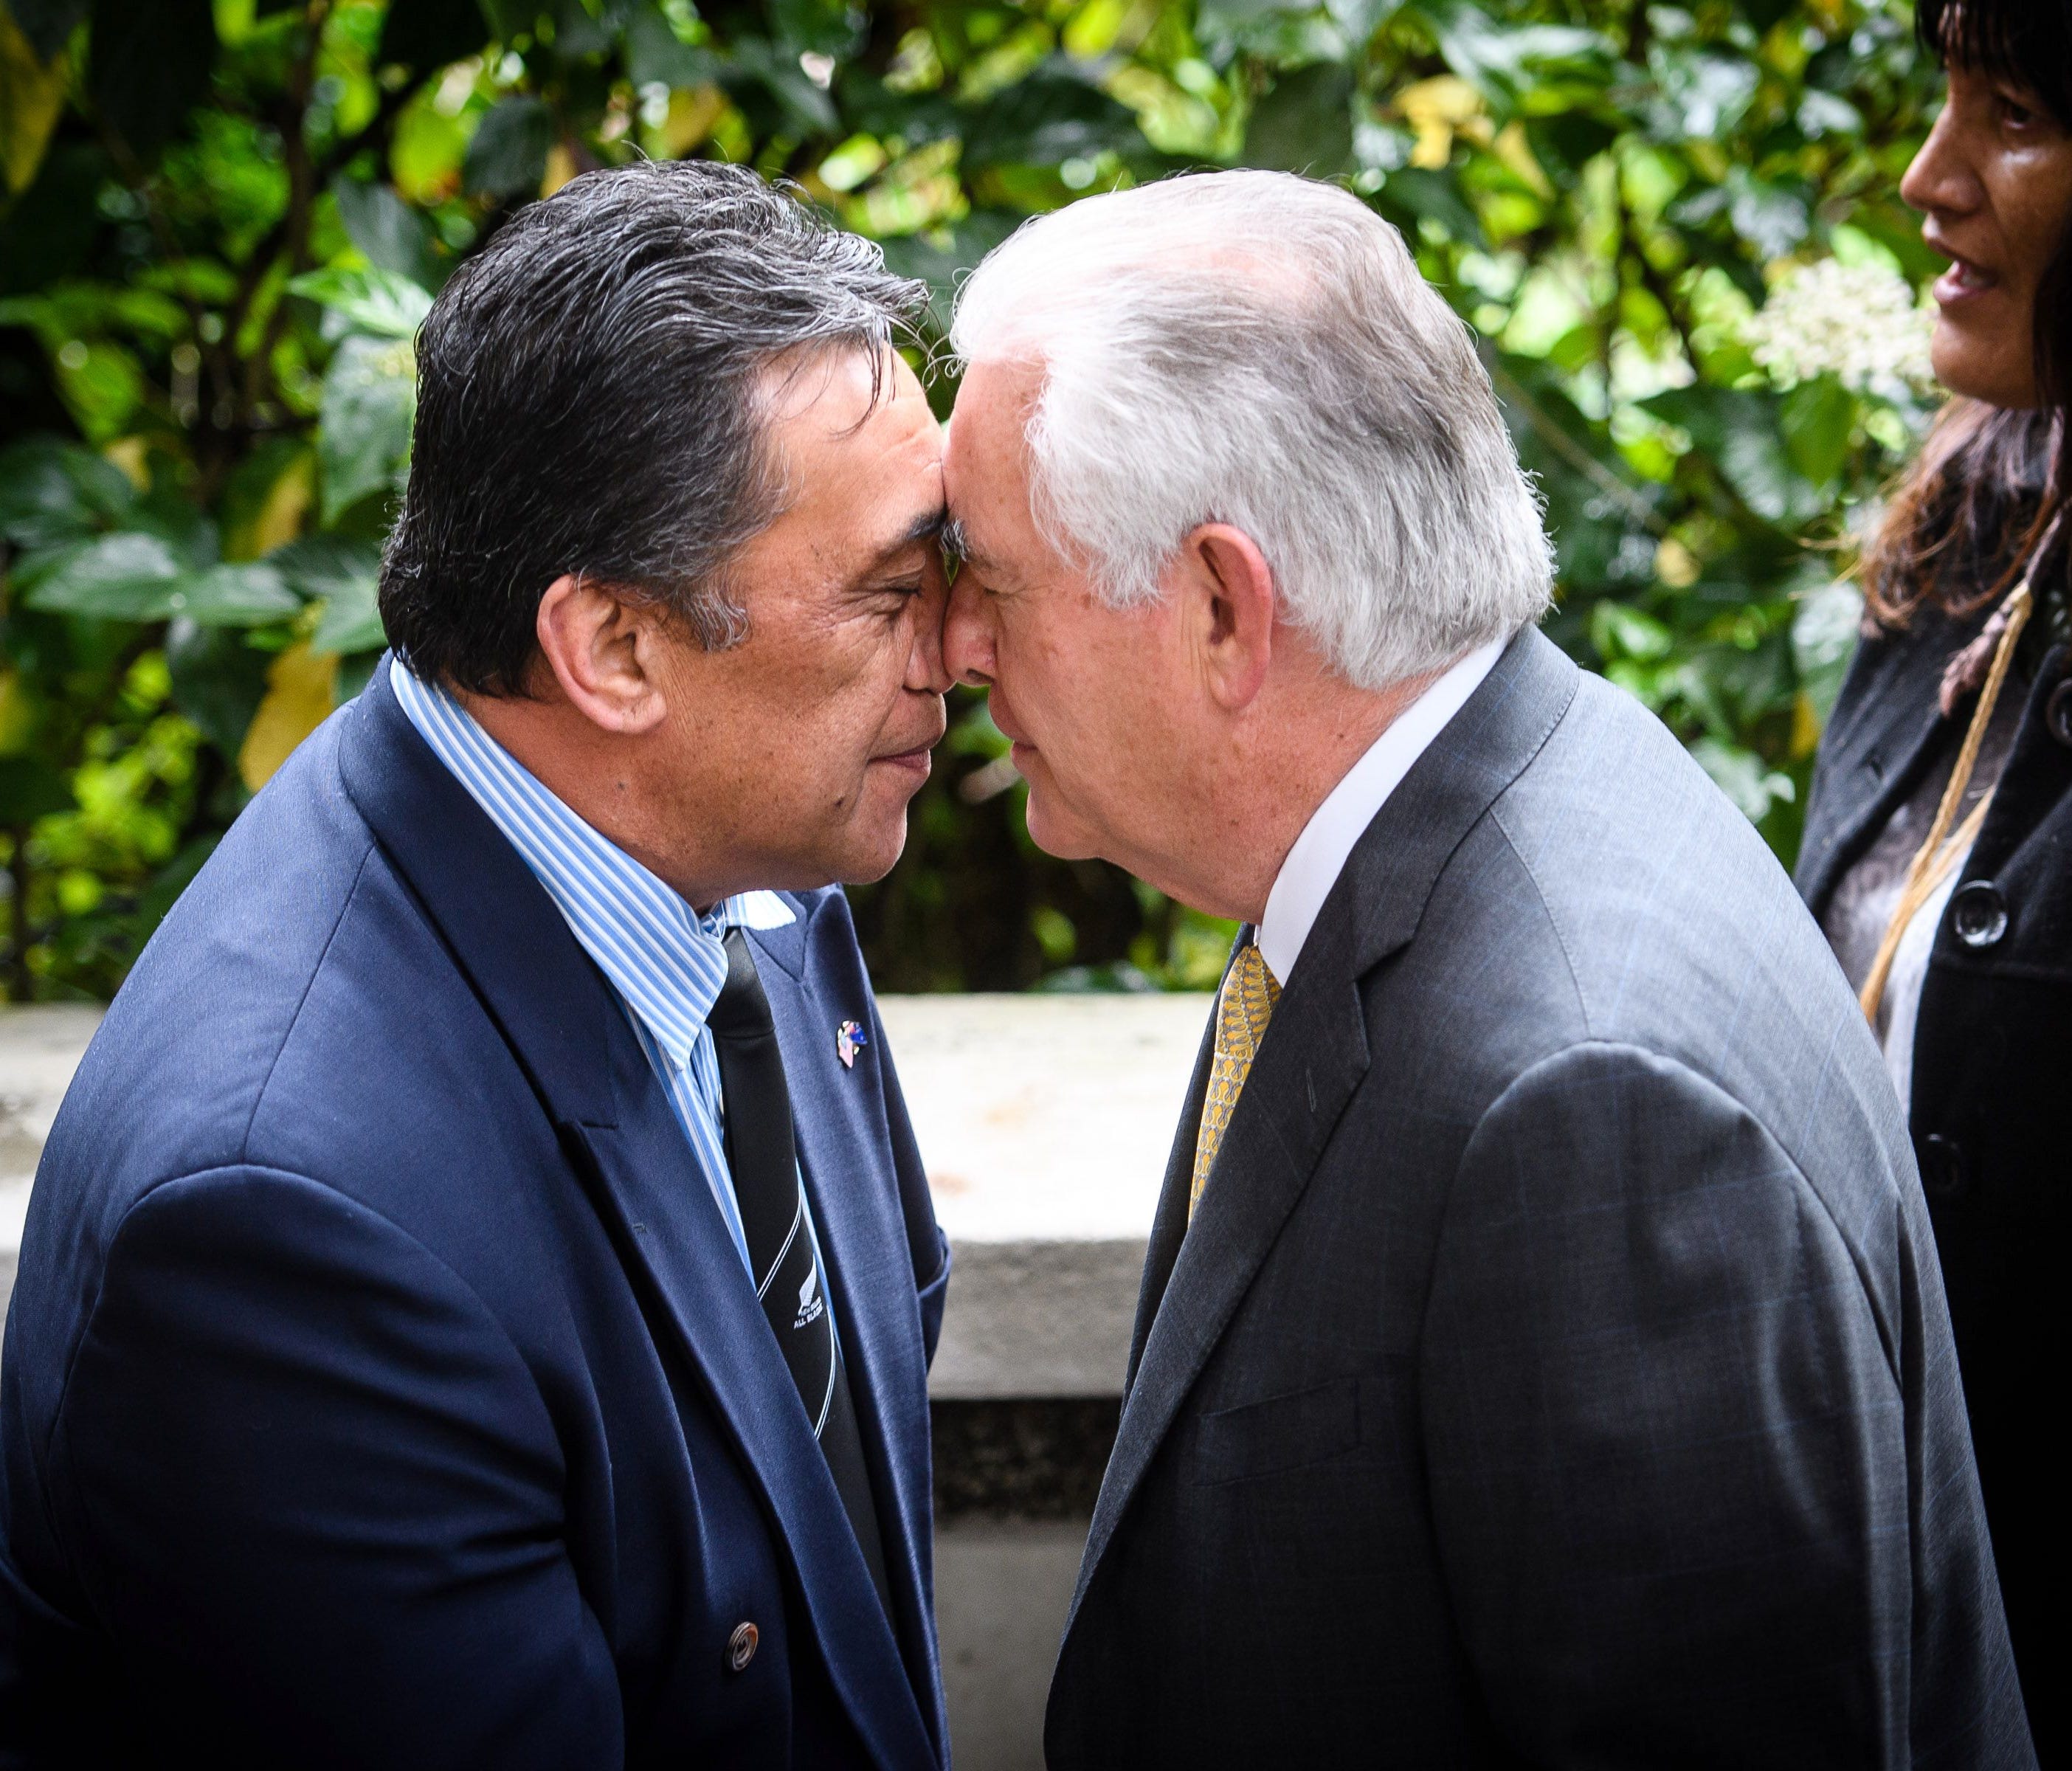 US Secretary of State Rex Tillerson receives a hongi, a traditional greeting, by a Maori elder as he is welcomed to Premiere House in Wellington on June 6, 2017.